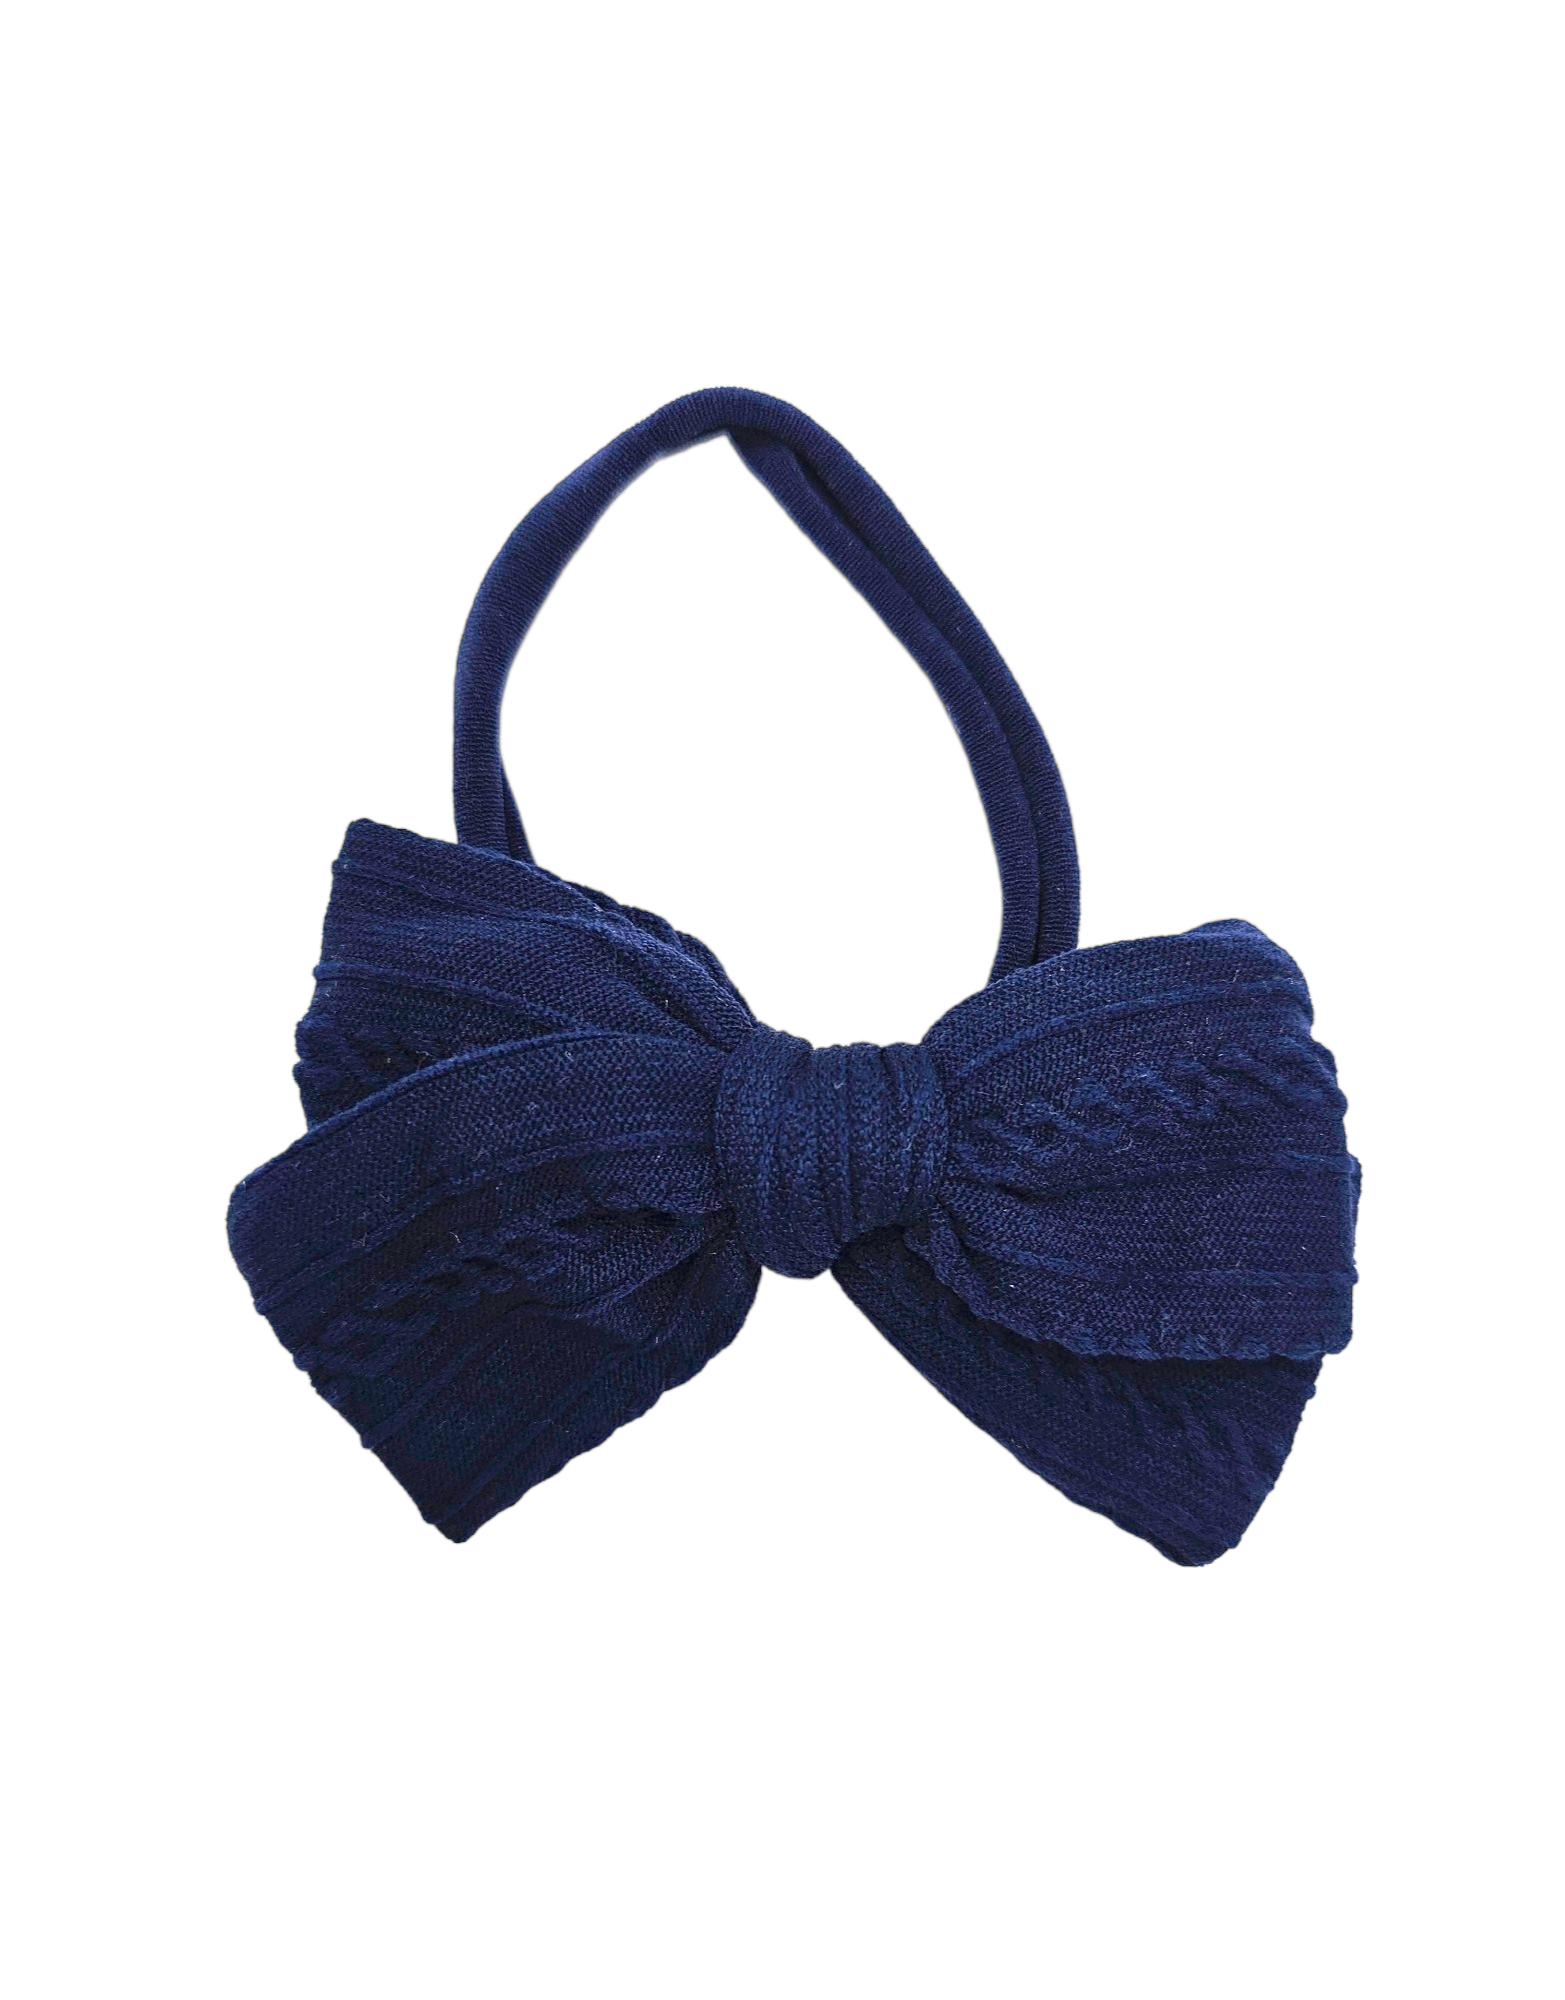 Navy Blue 3.5 Inch Cable Knit Dainty Bow Headband - Betty Brown Boutique Ltd